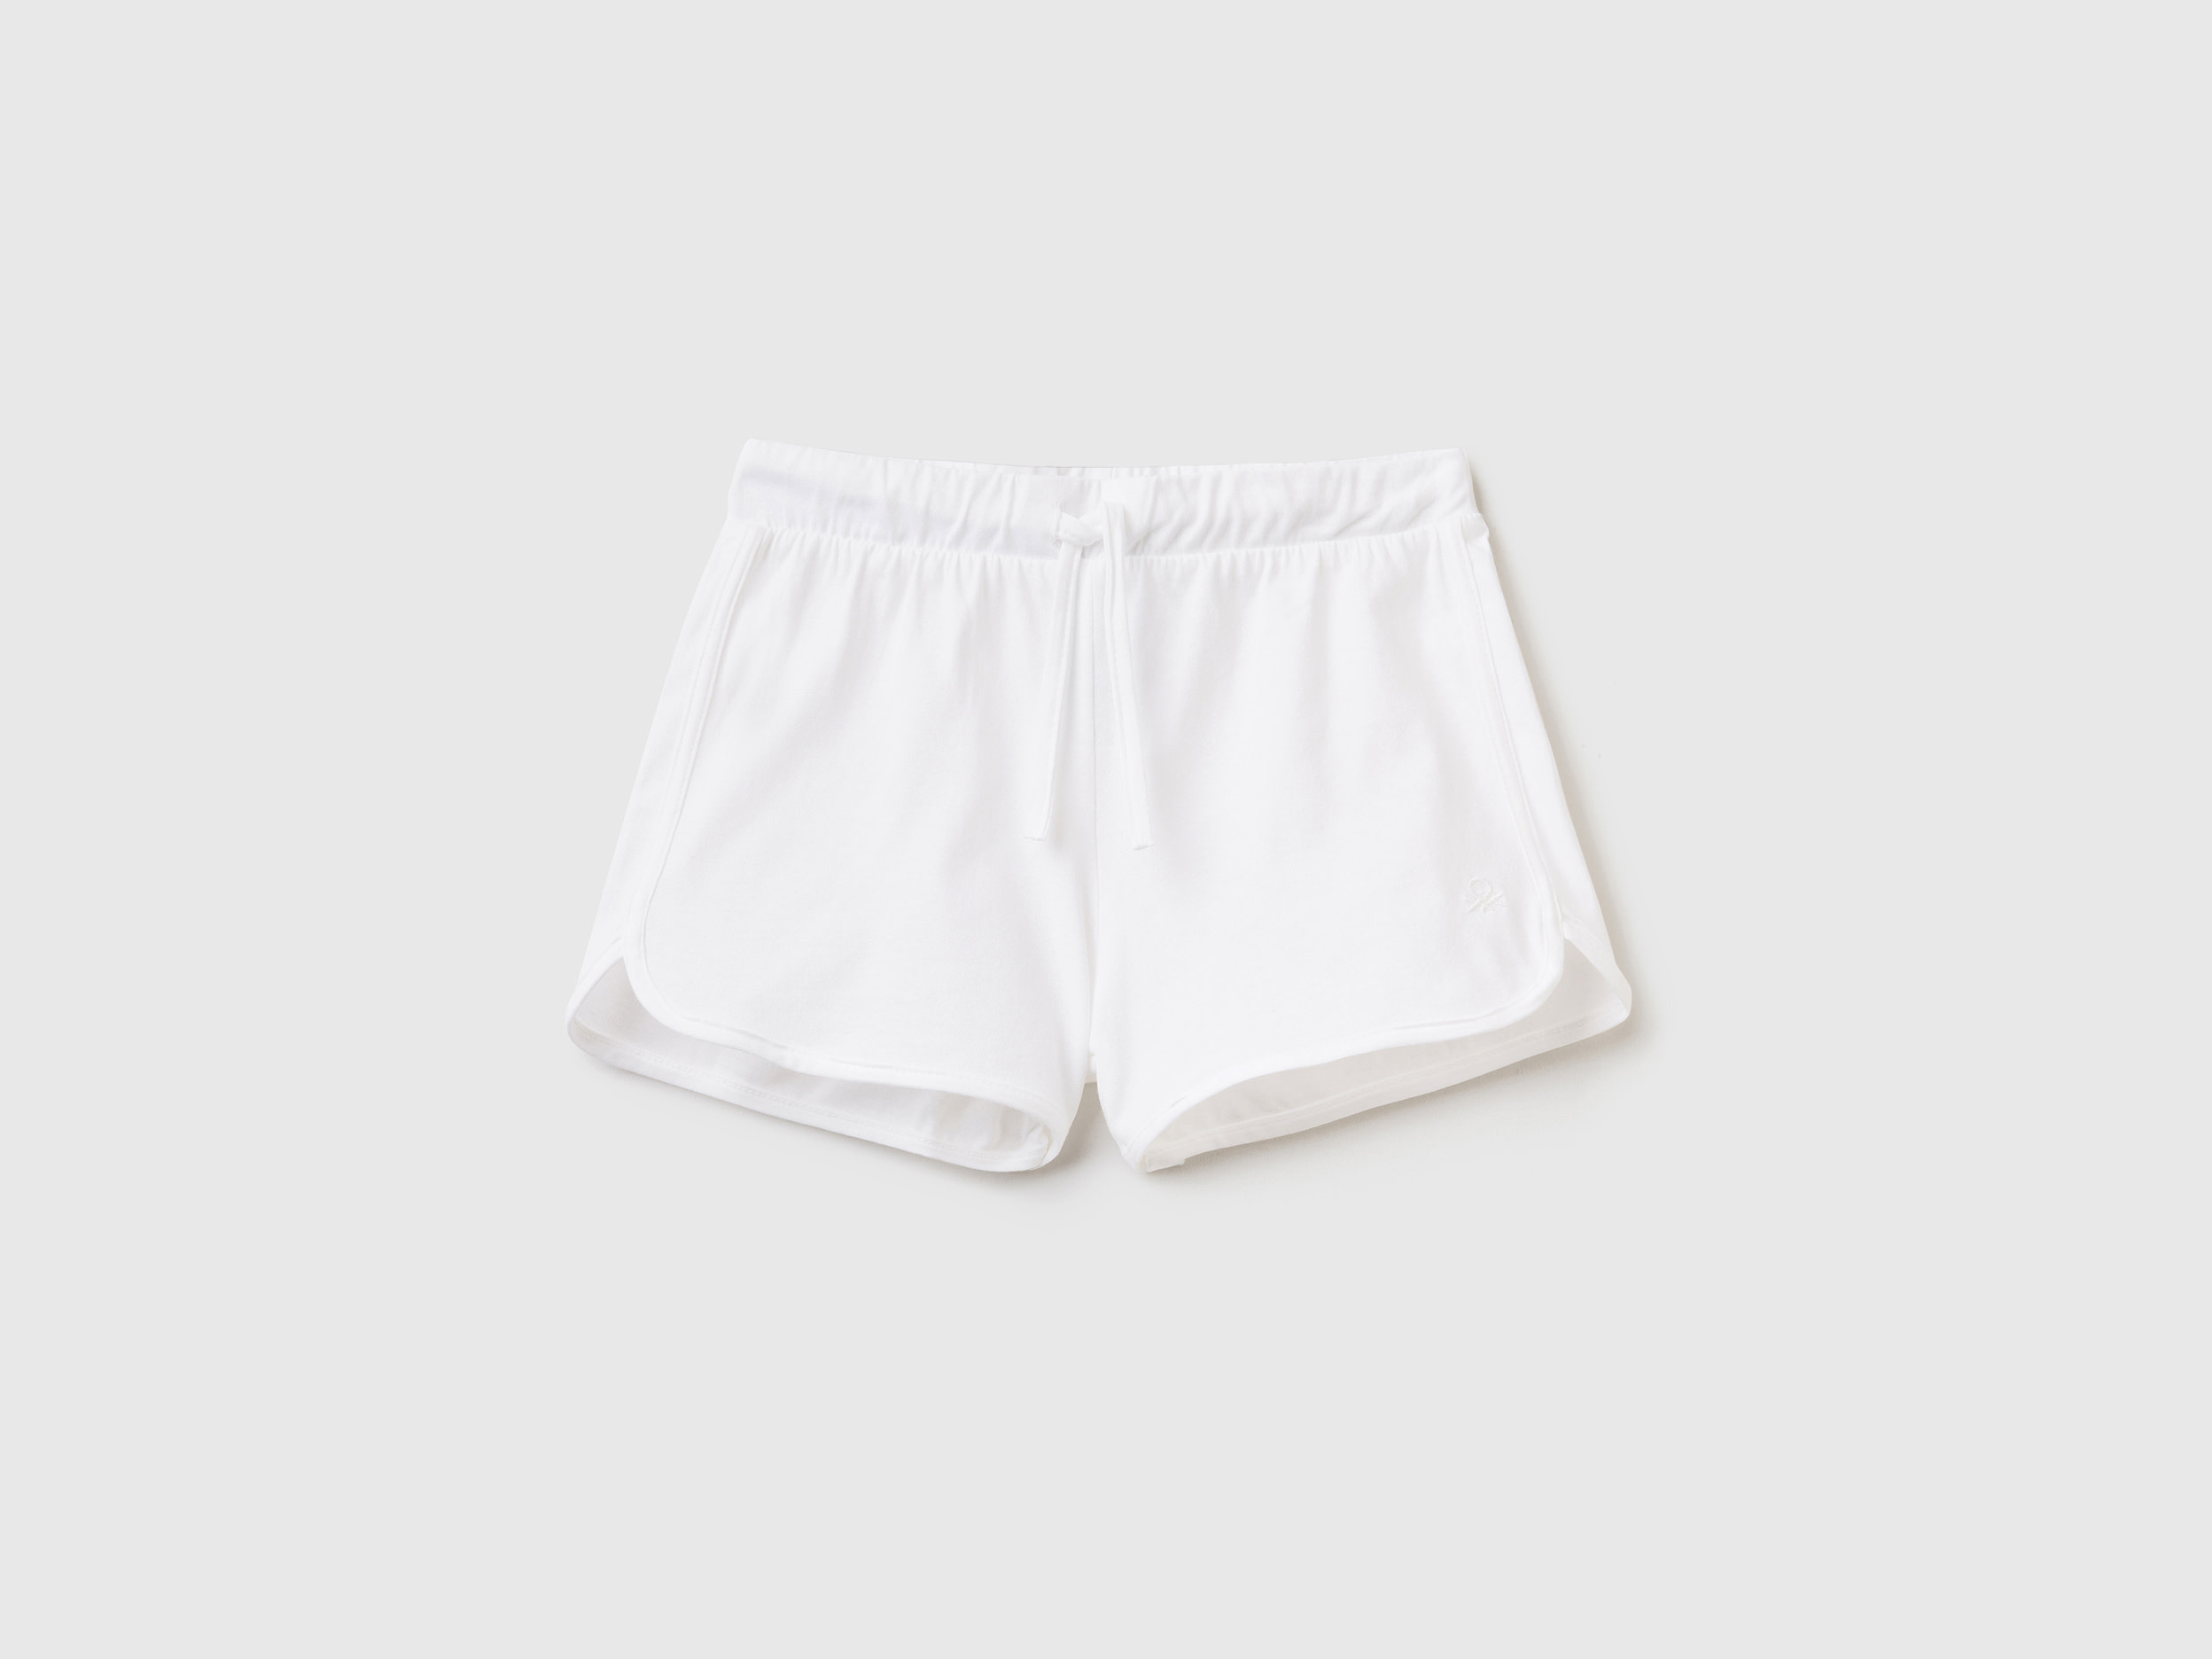 Image of Benetton, Runner Style Shorts In Organic Cotton, size M, White, Kids